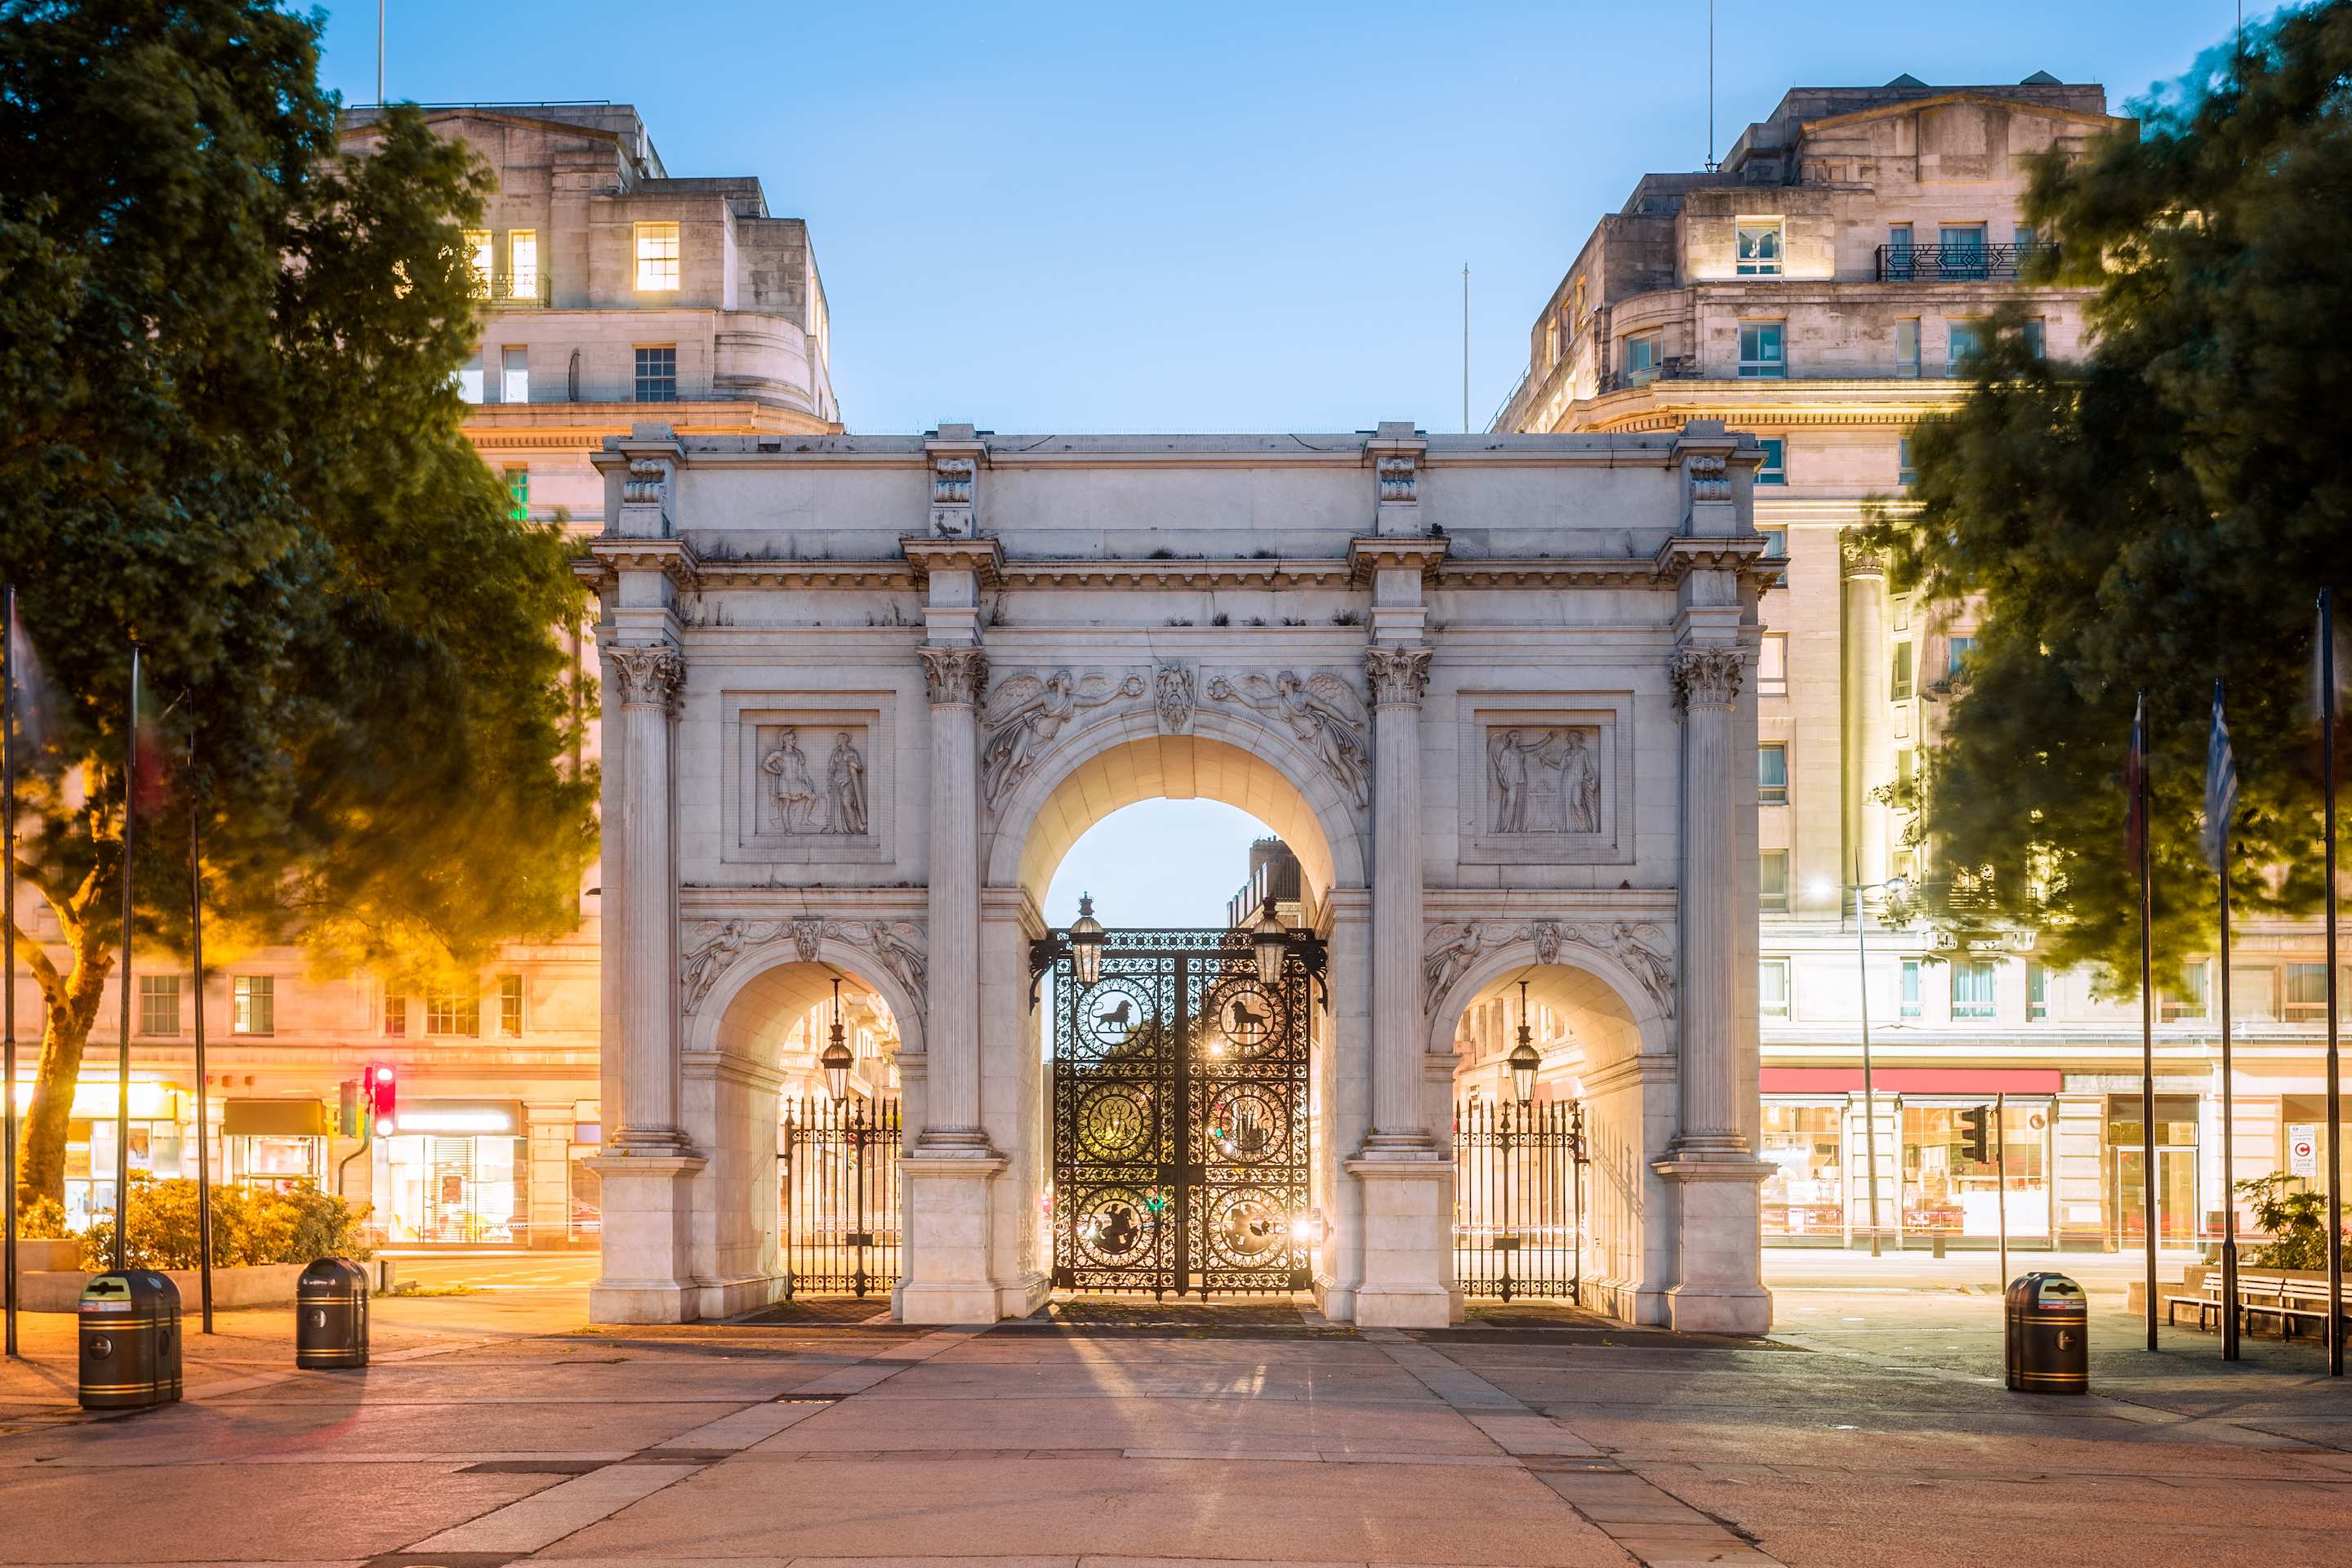 External view of Marble Arch in the evening in London, UK